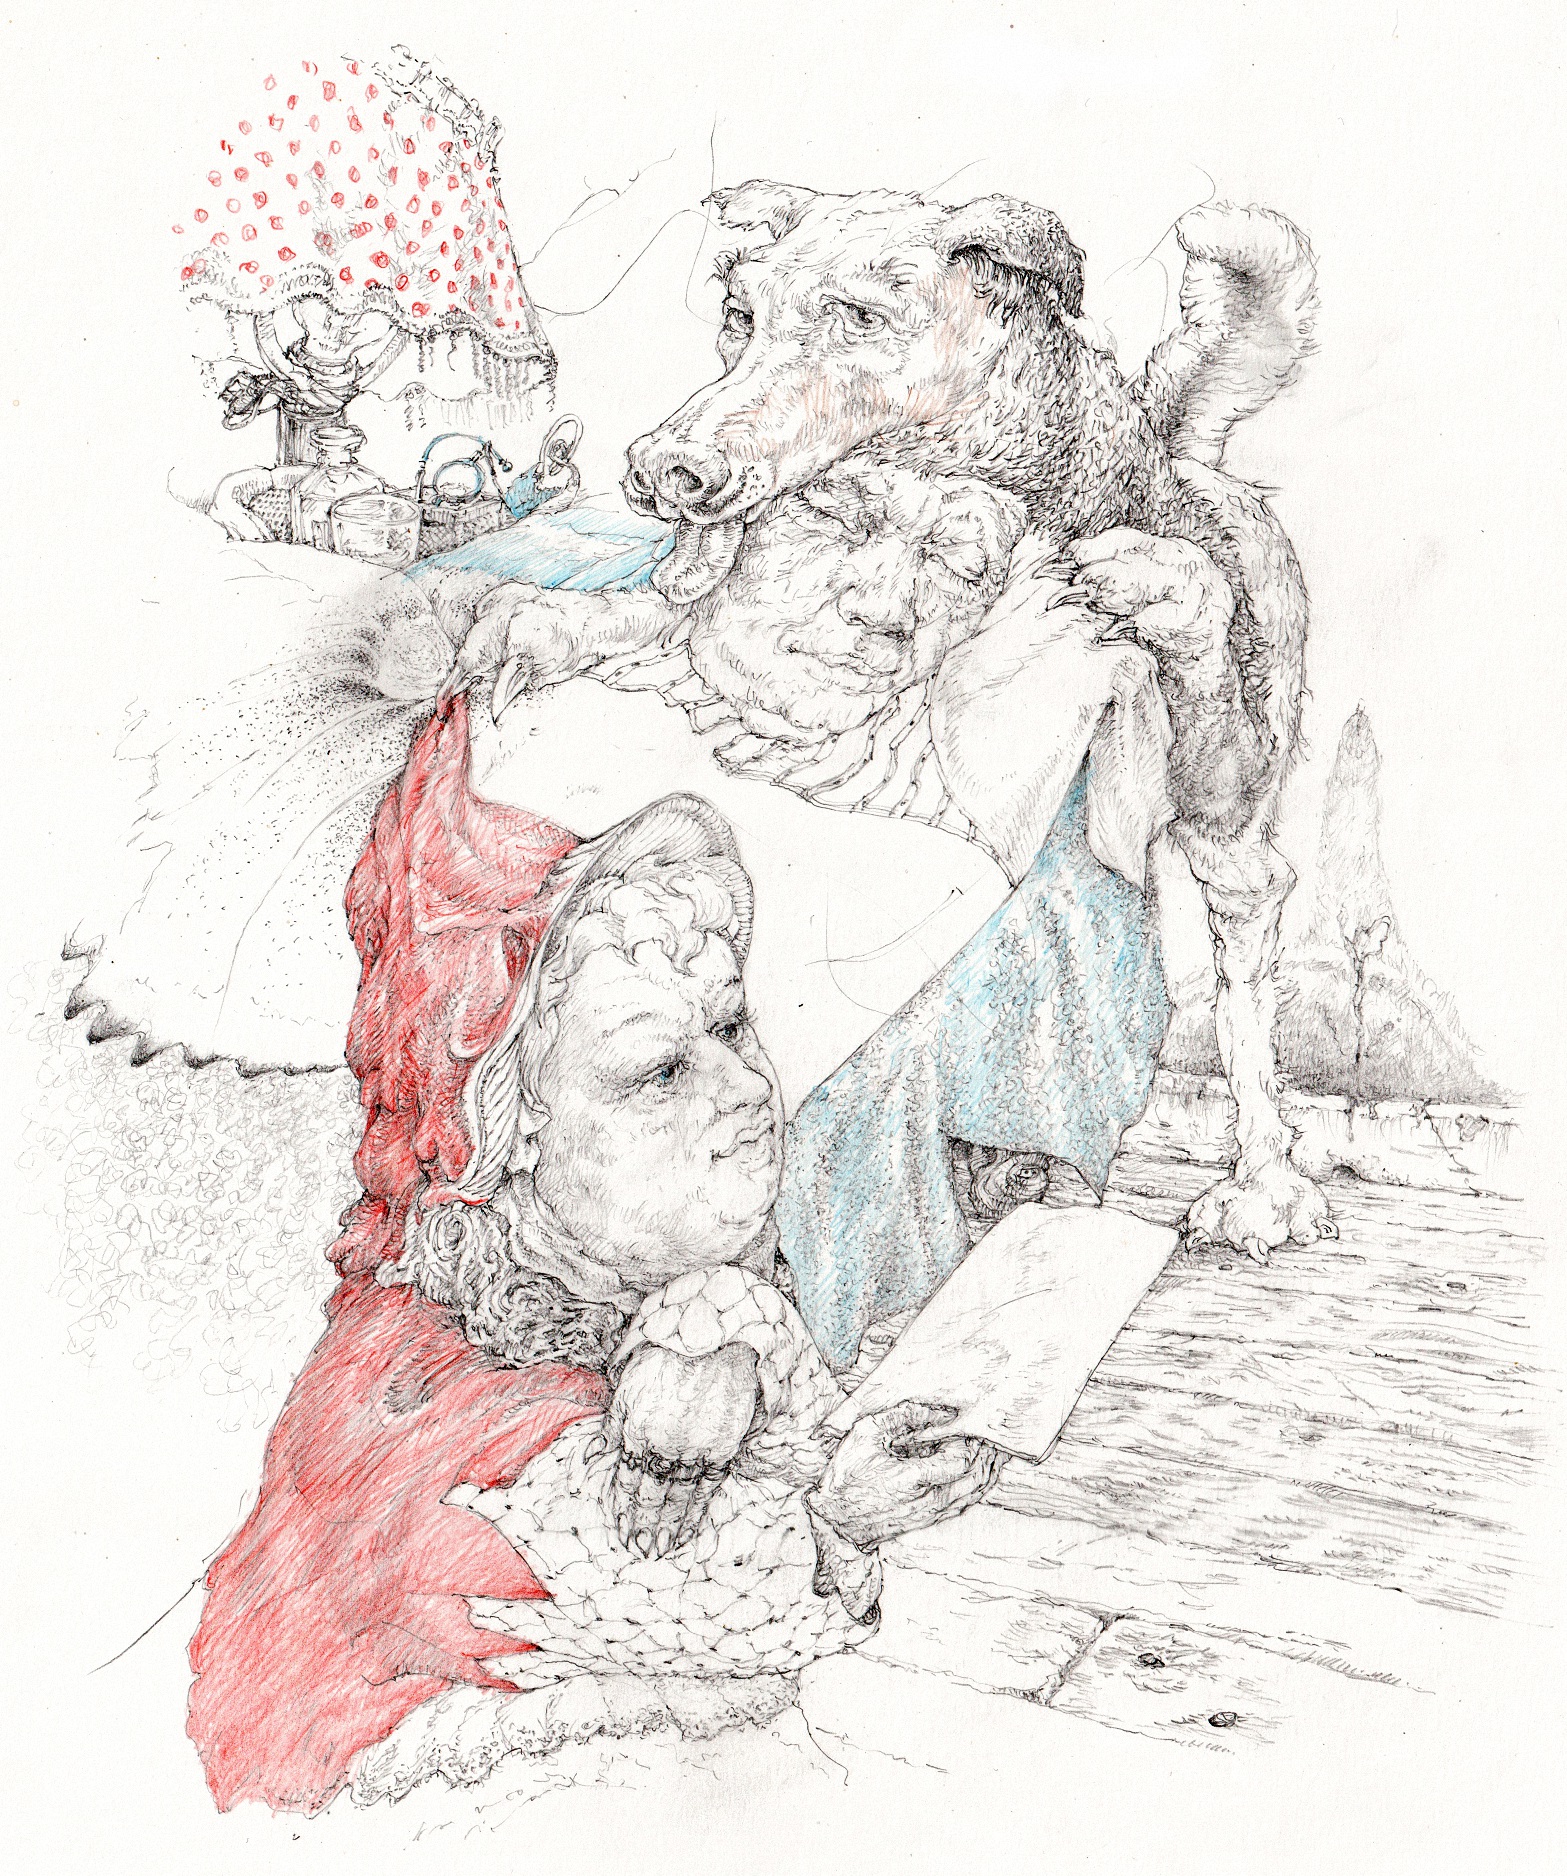 04. Recent drawings series. 
<strong>Little Red Riding Hood reads Gandma’s will. (Plus Ammut. Egypt.)</strong>
First things first.  Getting priorities right.
(2b Pencil and colour crayon drawing, A3. 180grm. Canson “Bristol”)